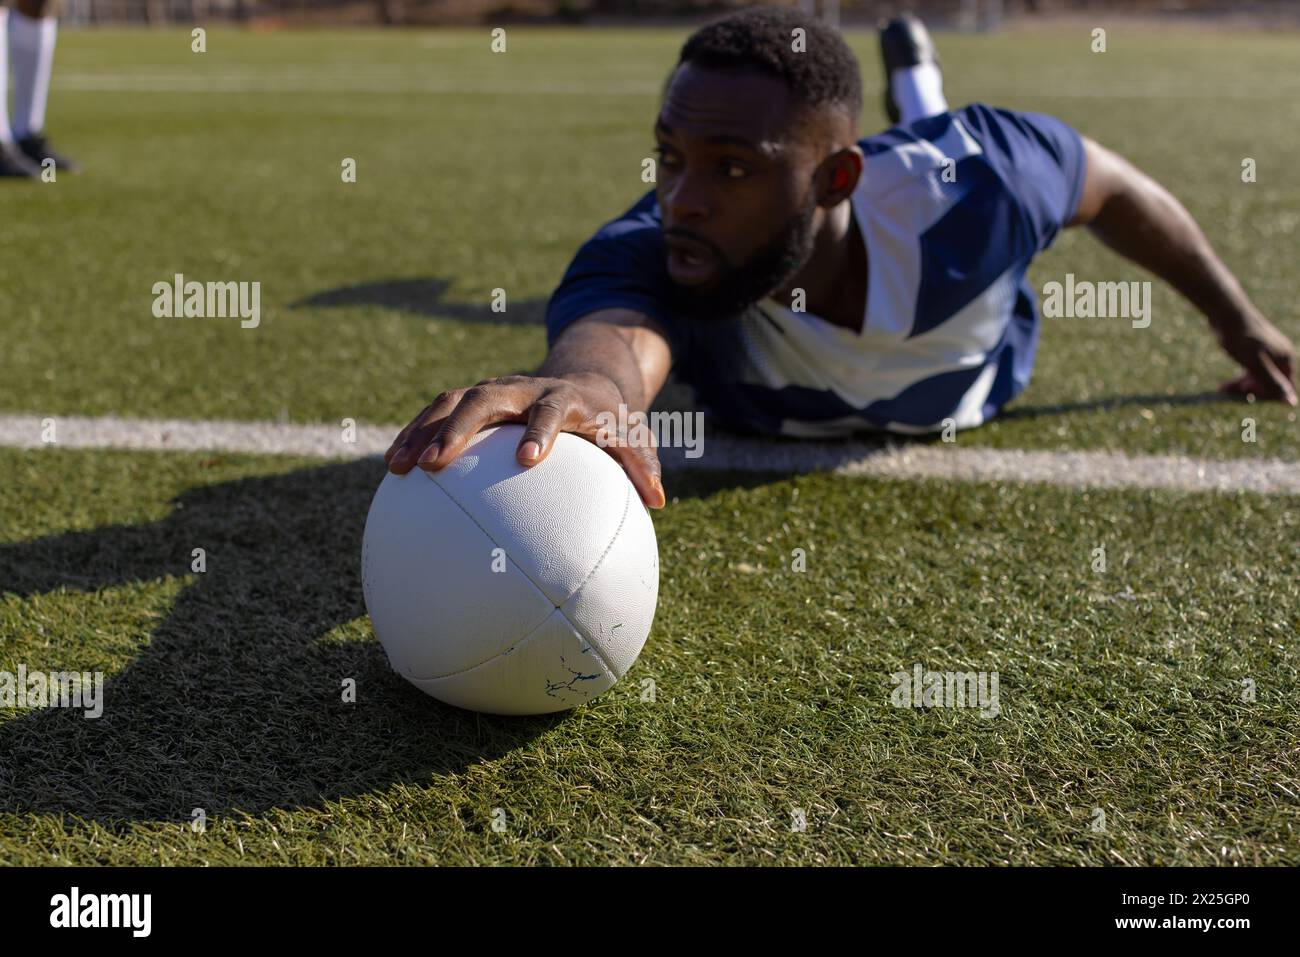 African American young male athlete reaching for a rugby ball on grass to score a try Stock Photo